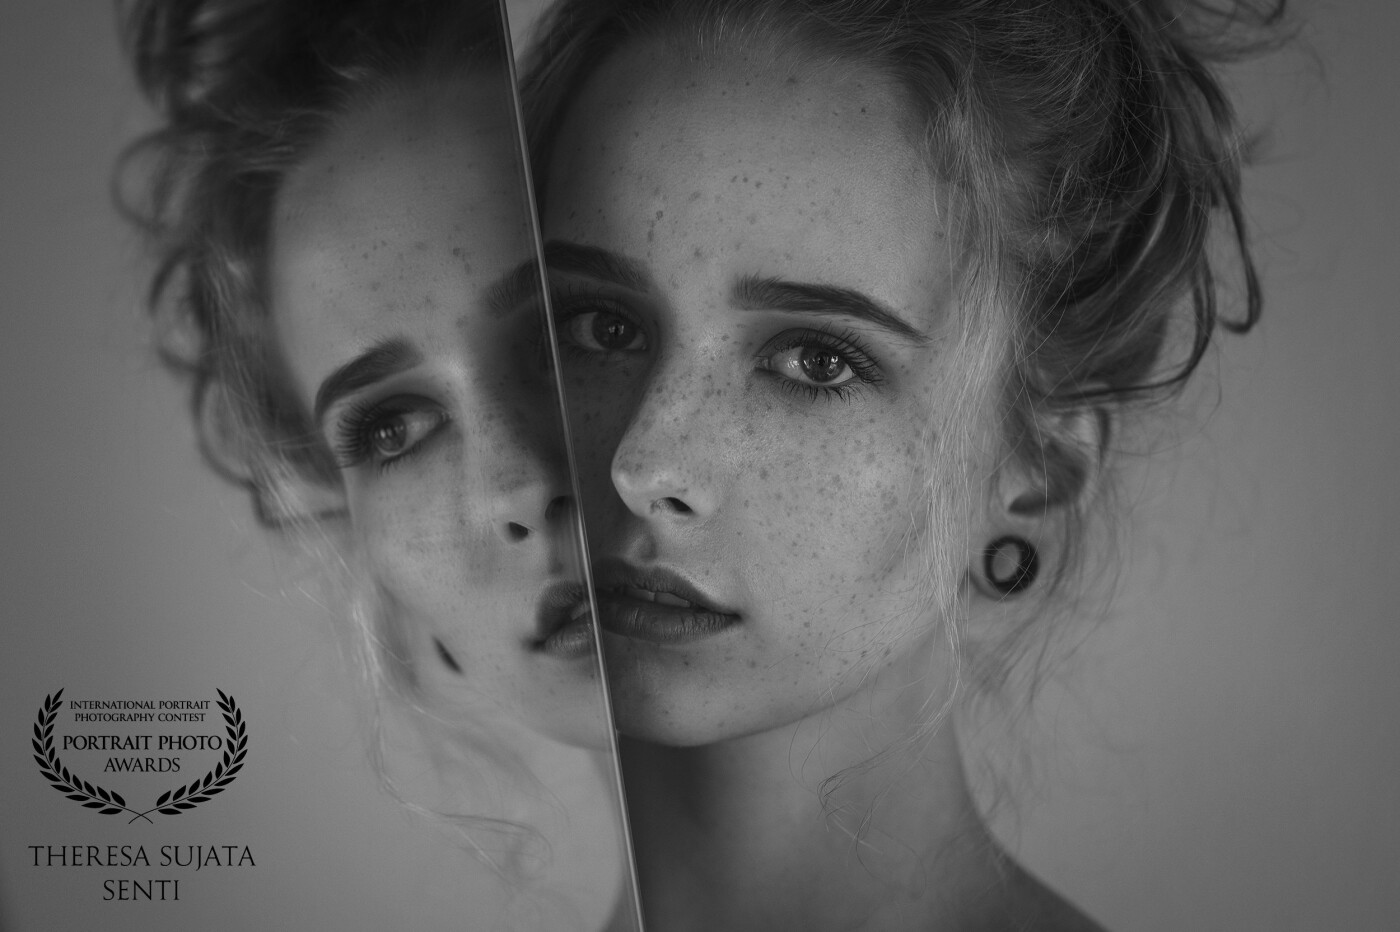 2x Nikol <3 I just love to work with mirrors, they a such a simple tool but the possibilities are endless.<br />
Model: Nikol<br />
Photo & Retouch: SujARTa / Theresa Sujata Senti